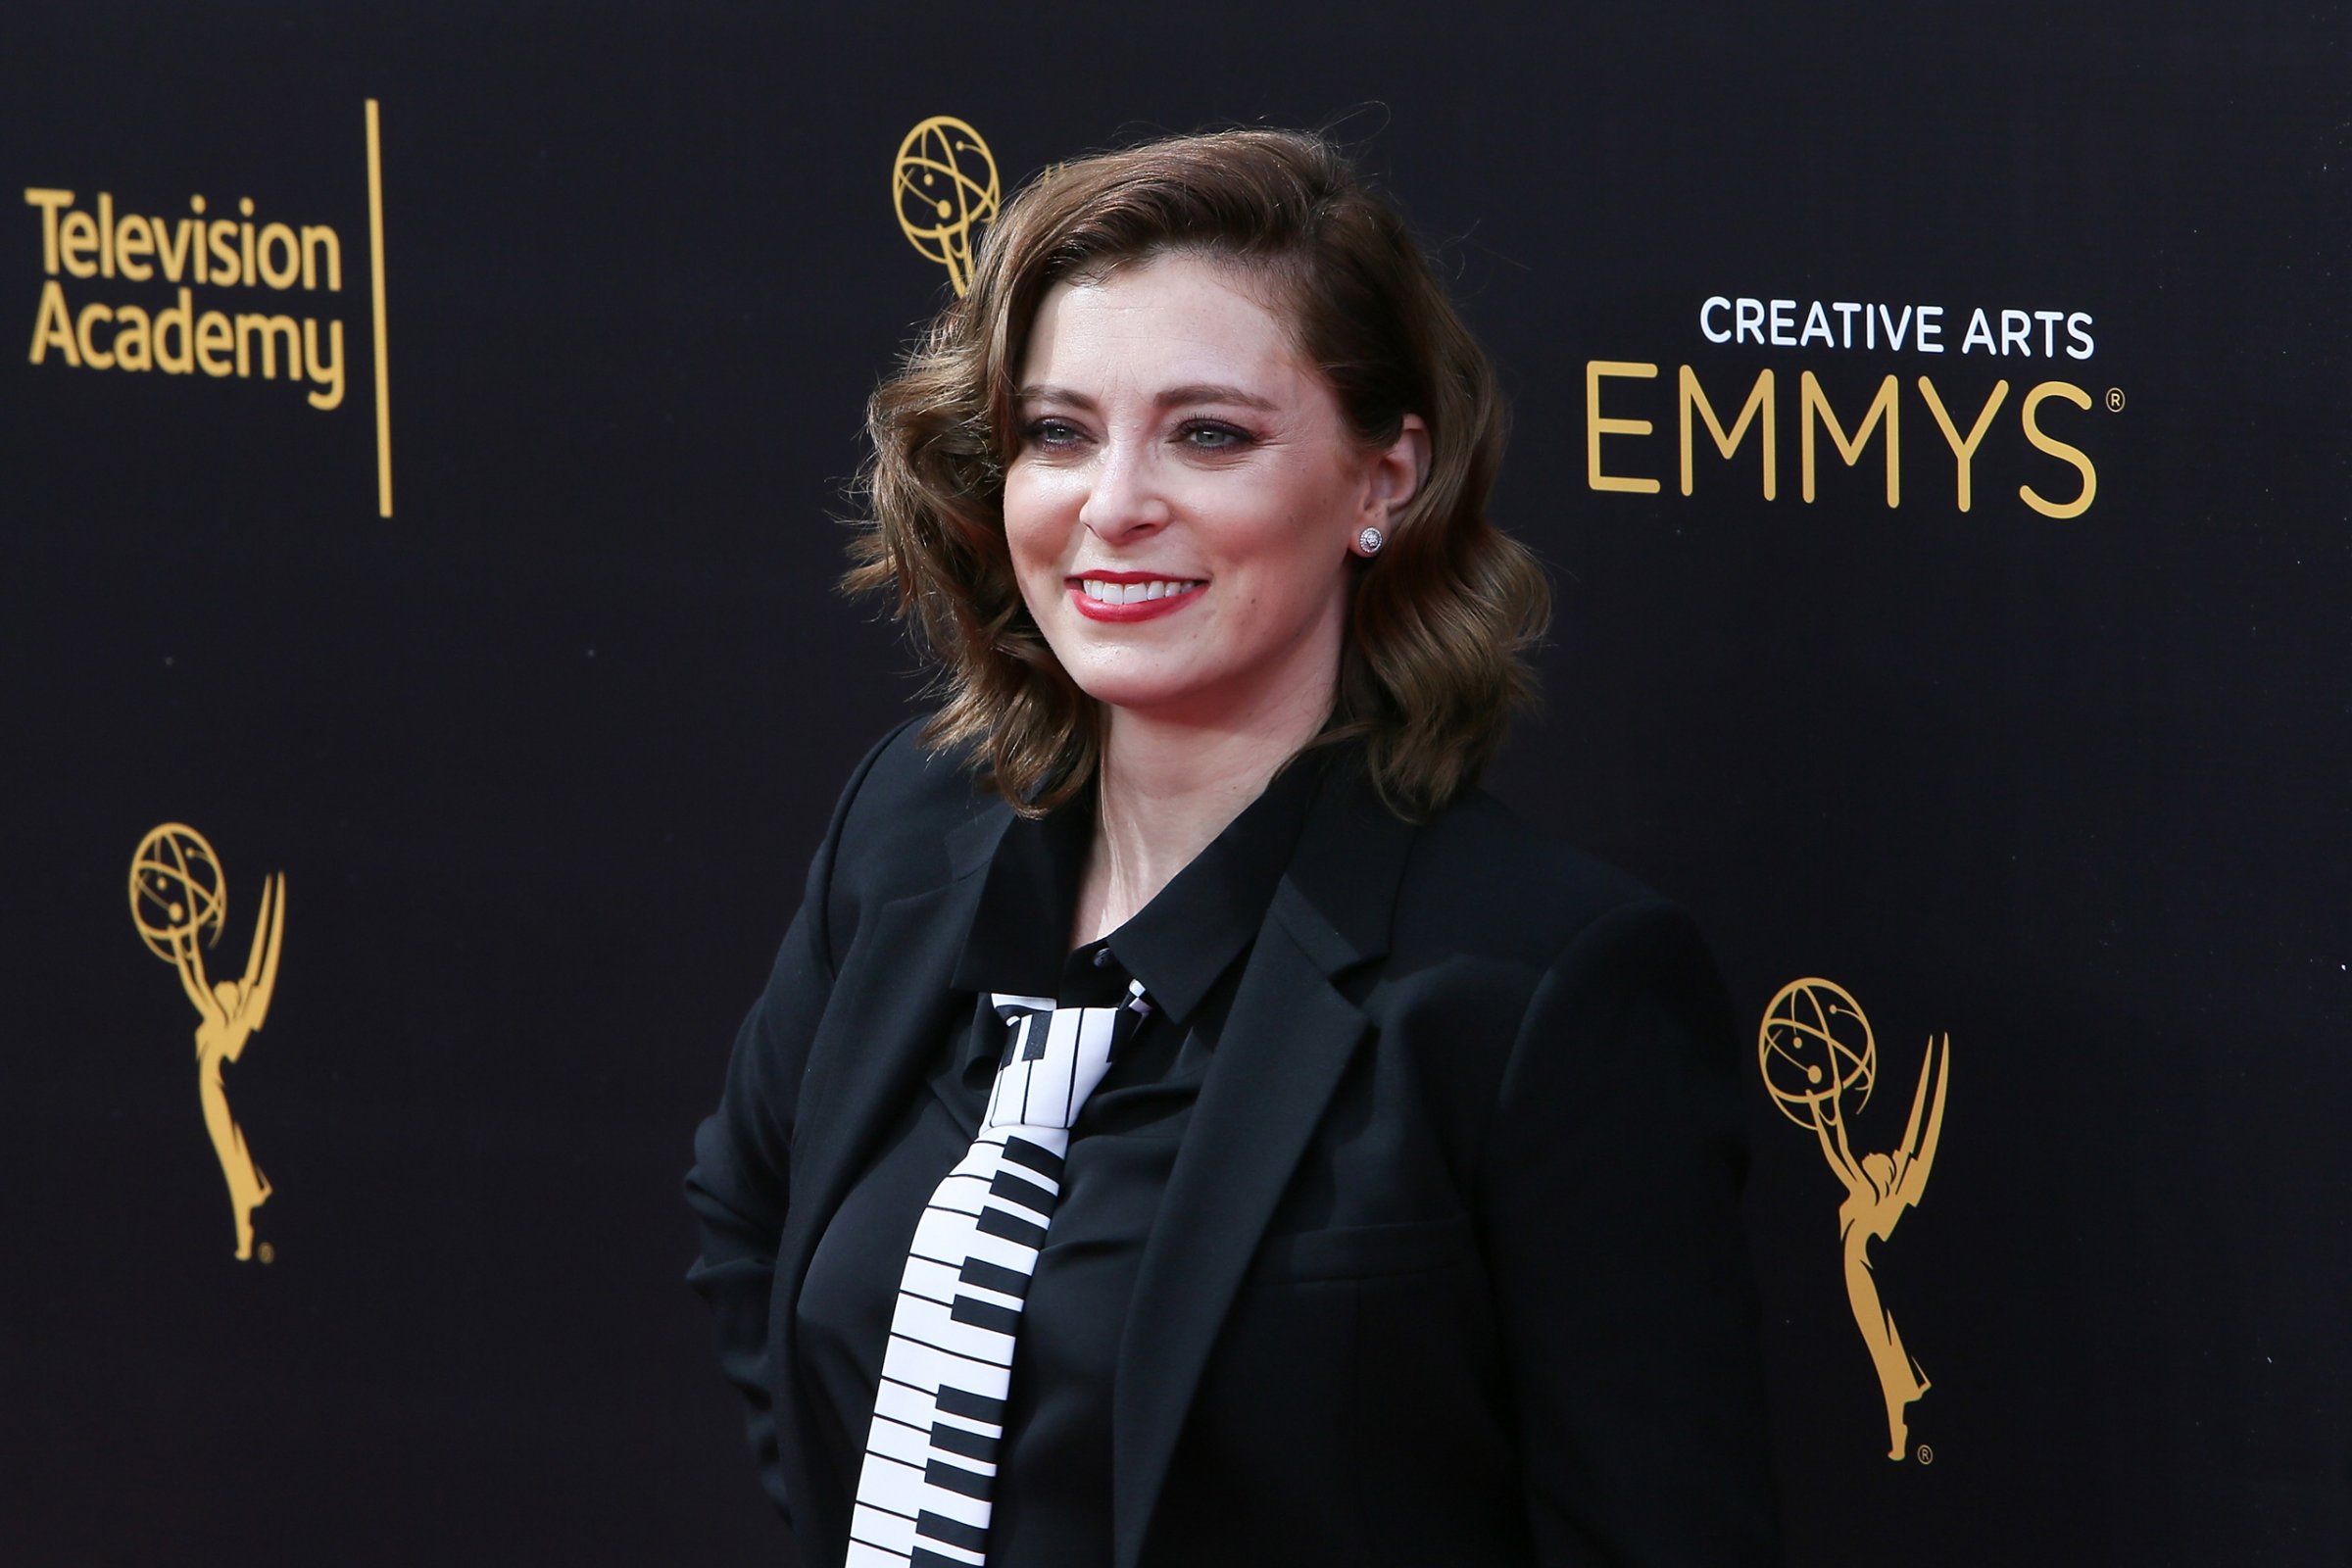 LOS ANGELES, CA - SEPTEMBER 10: Actress Rachel Bloom attends the 2016 Creative Arts Emmy Awards Day 1 at the Microsoft Theater on September 10, 2016 in Los Angeles, California. (Photo by David Livingston/Getty Images)